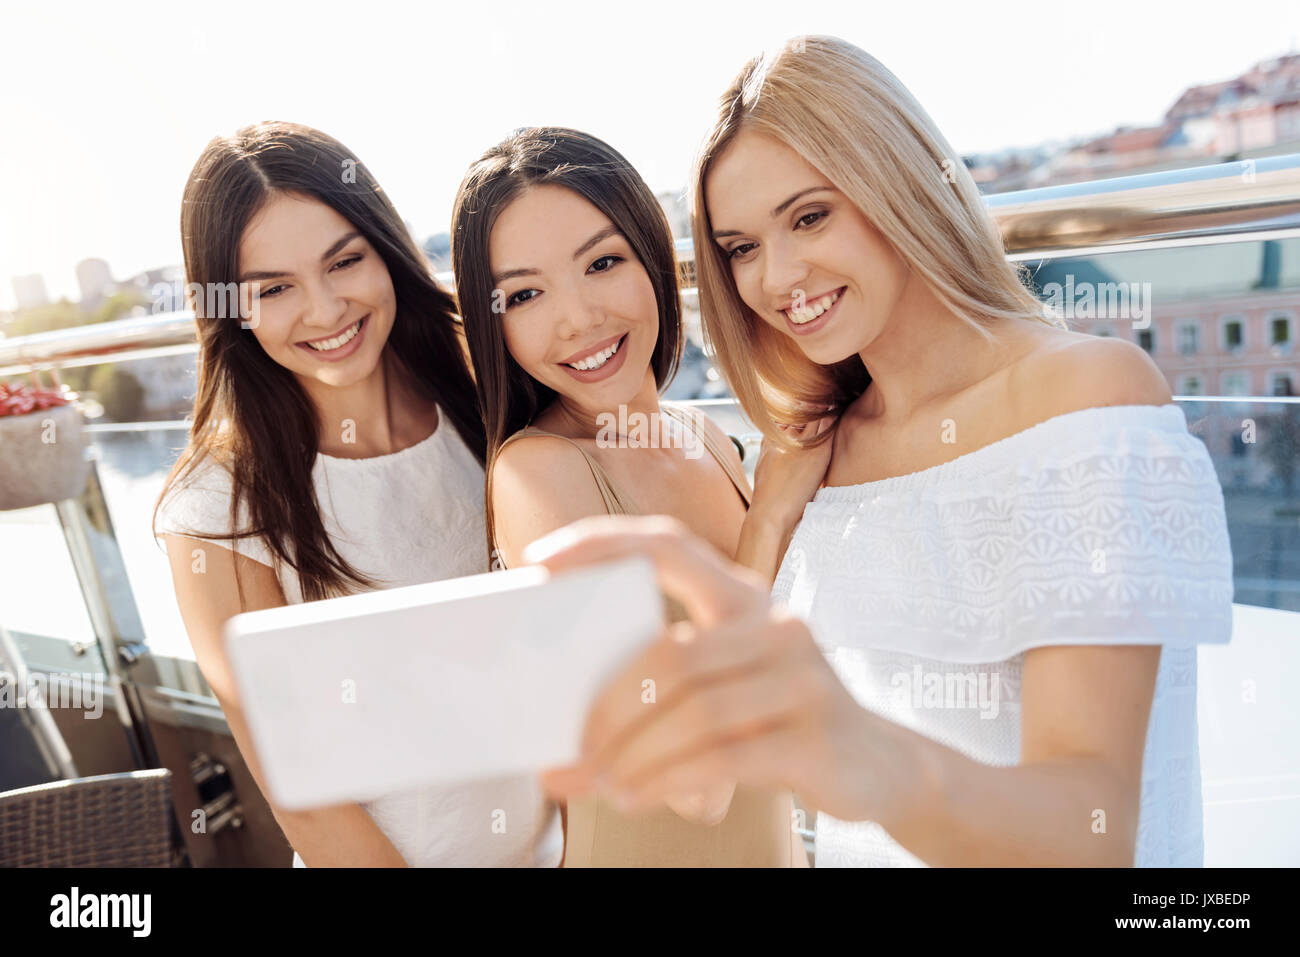 Delighted happy woman taking photos Stock Photo